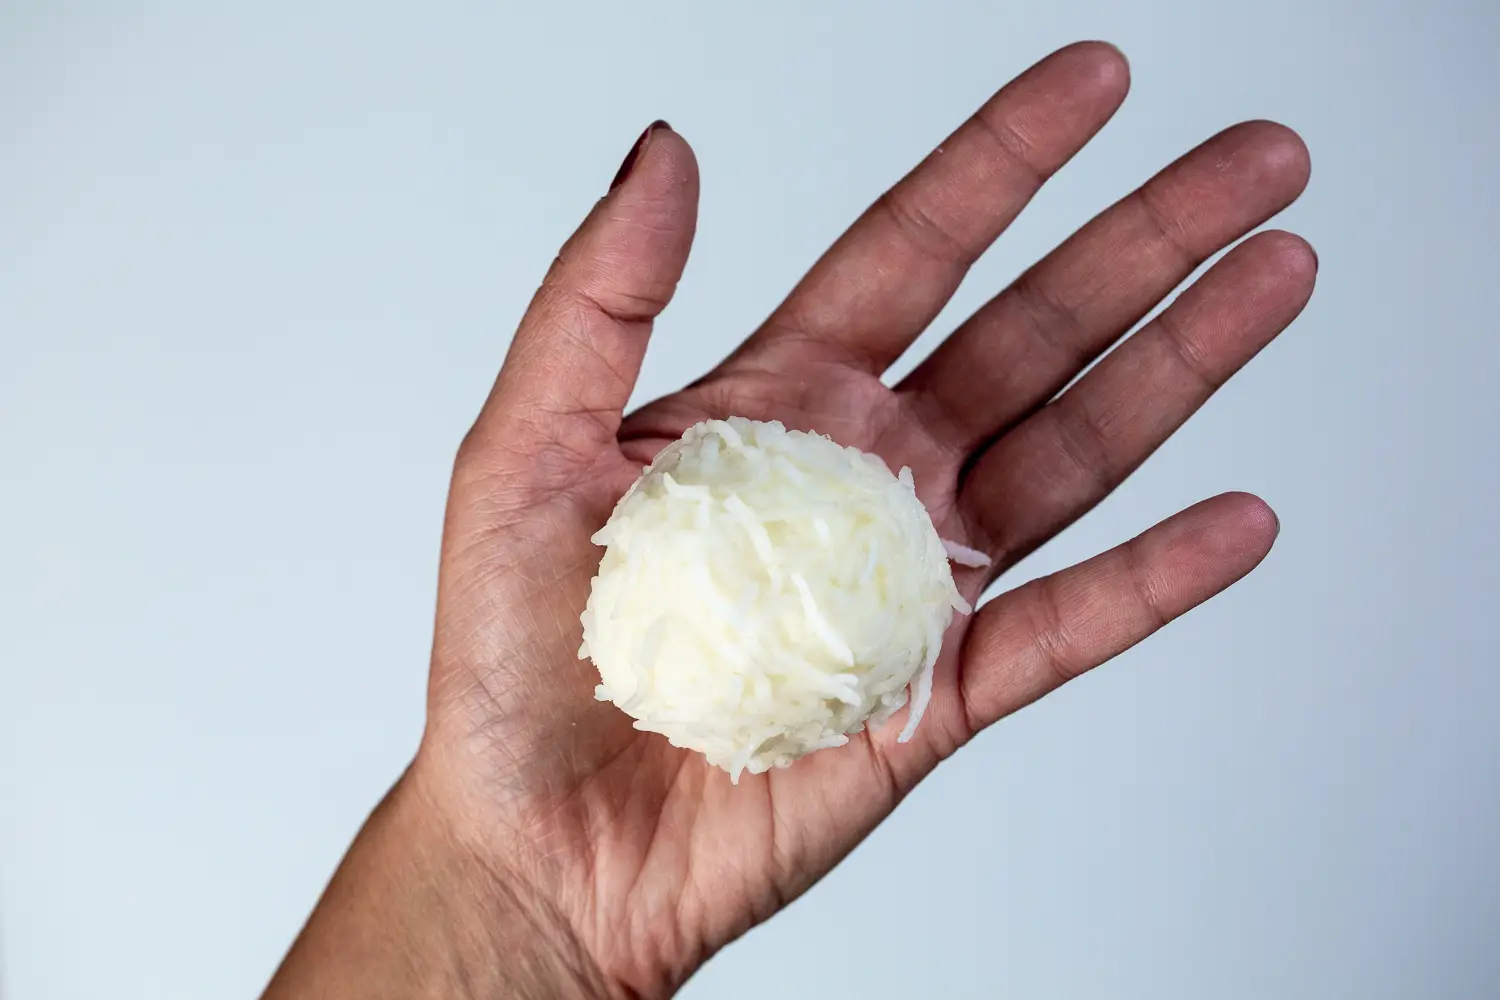 a hand holding a large, soft ball of cooked rice